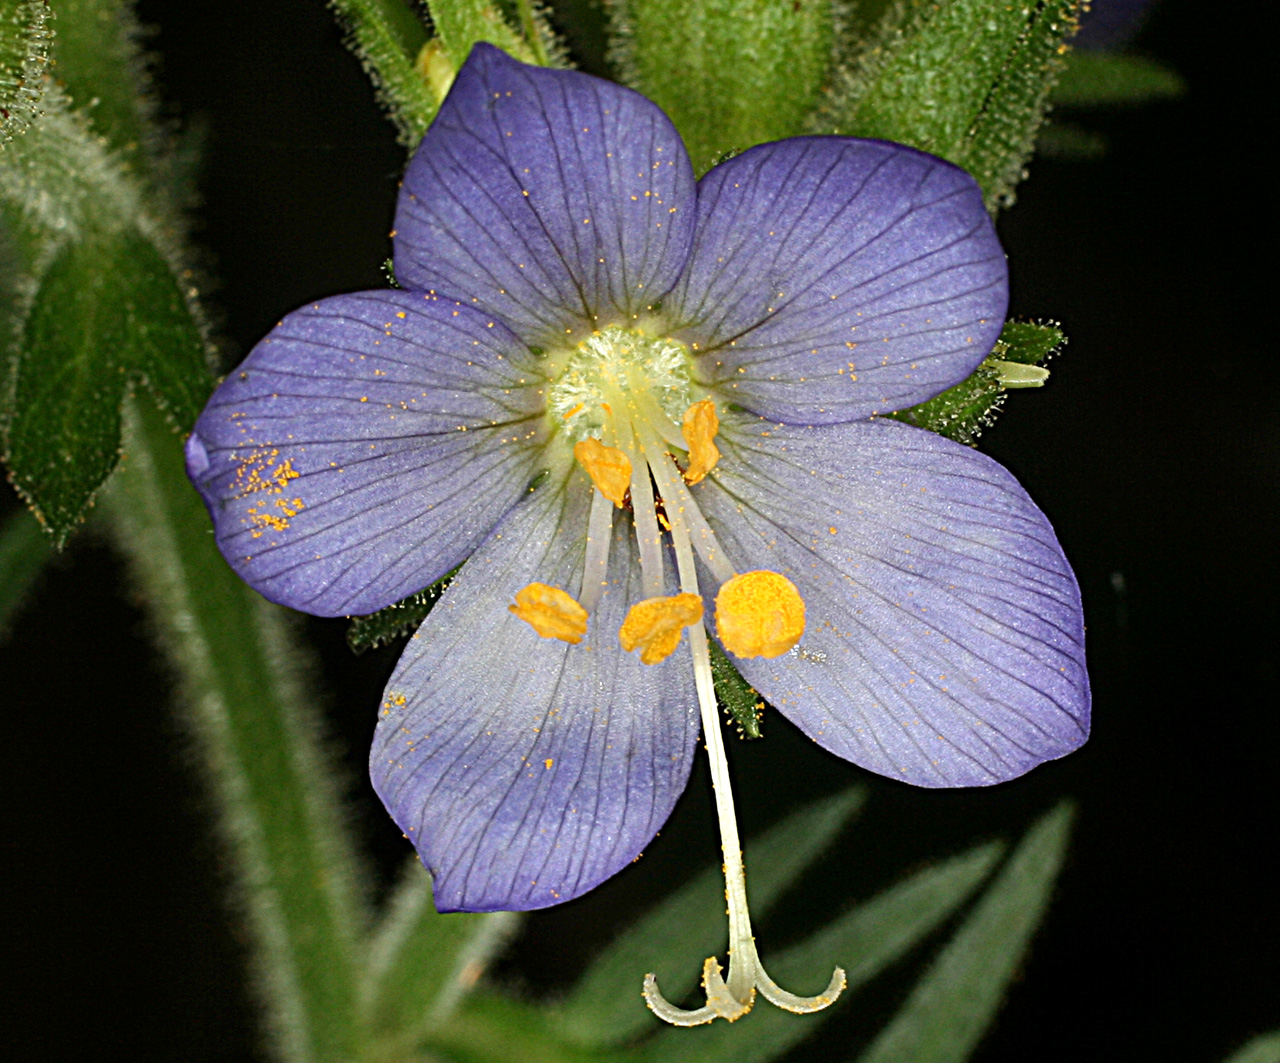 Close-up of flower showing five purple petals, pollen-covered stamens and a protruding style